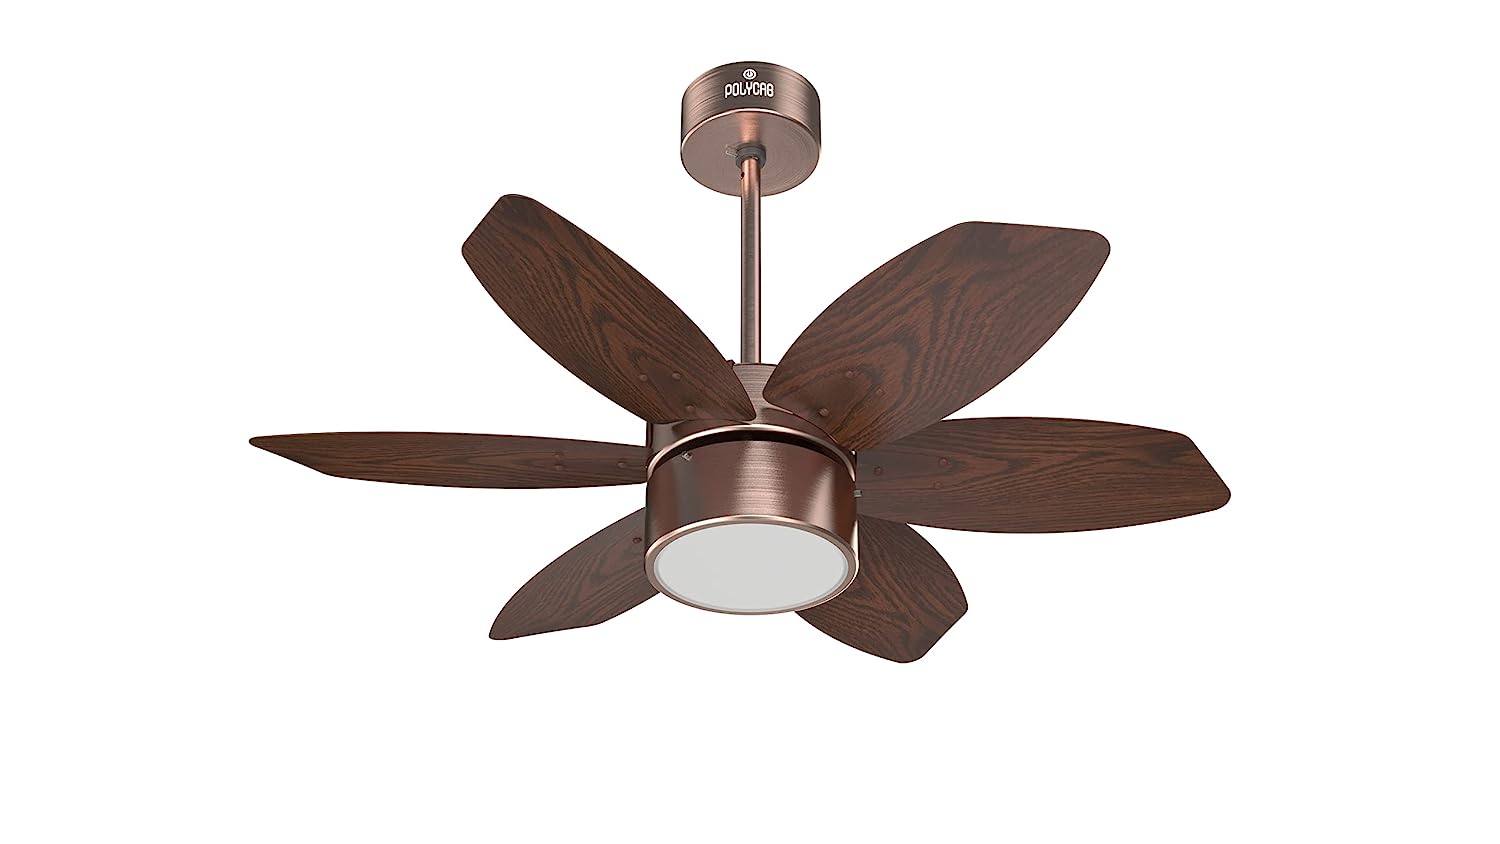 Polycab Superia SP03 Super Premium 800 mm Underlight Designer Ceiling Fan With Remote, Built-in 6 Colour LED Light and 2 years warranty (Antique Copper Rosewood)